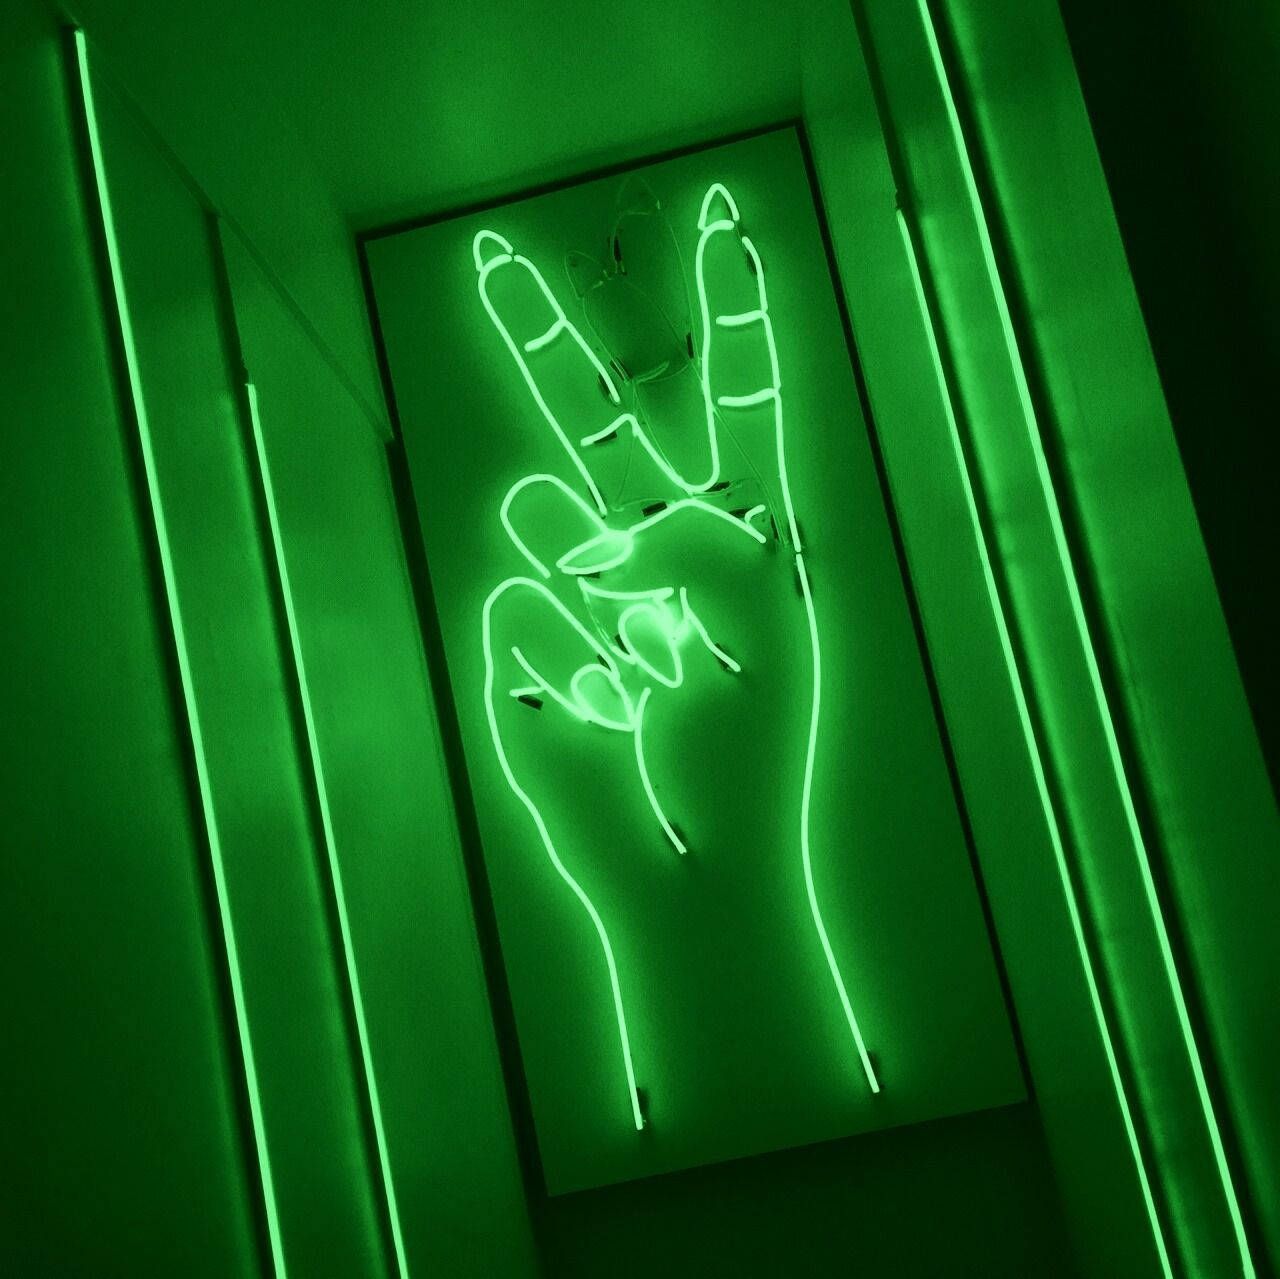 A neon sign of a hand making the peace sign - Green, neon green, peace